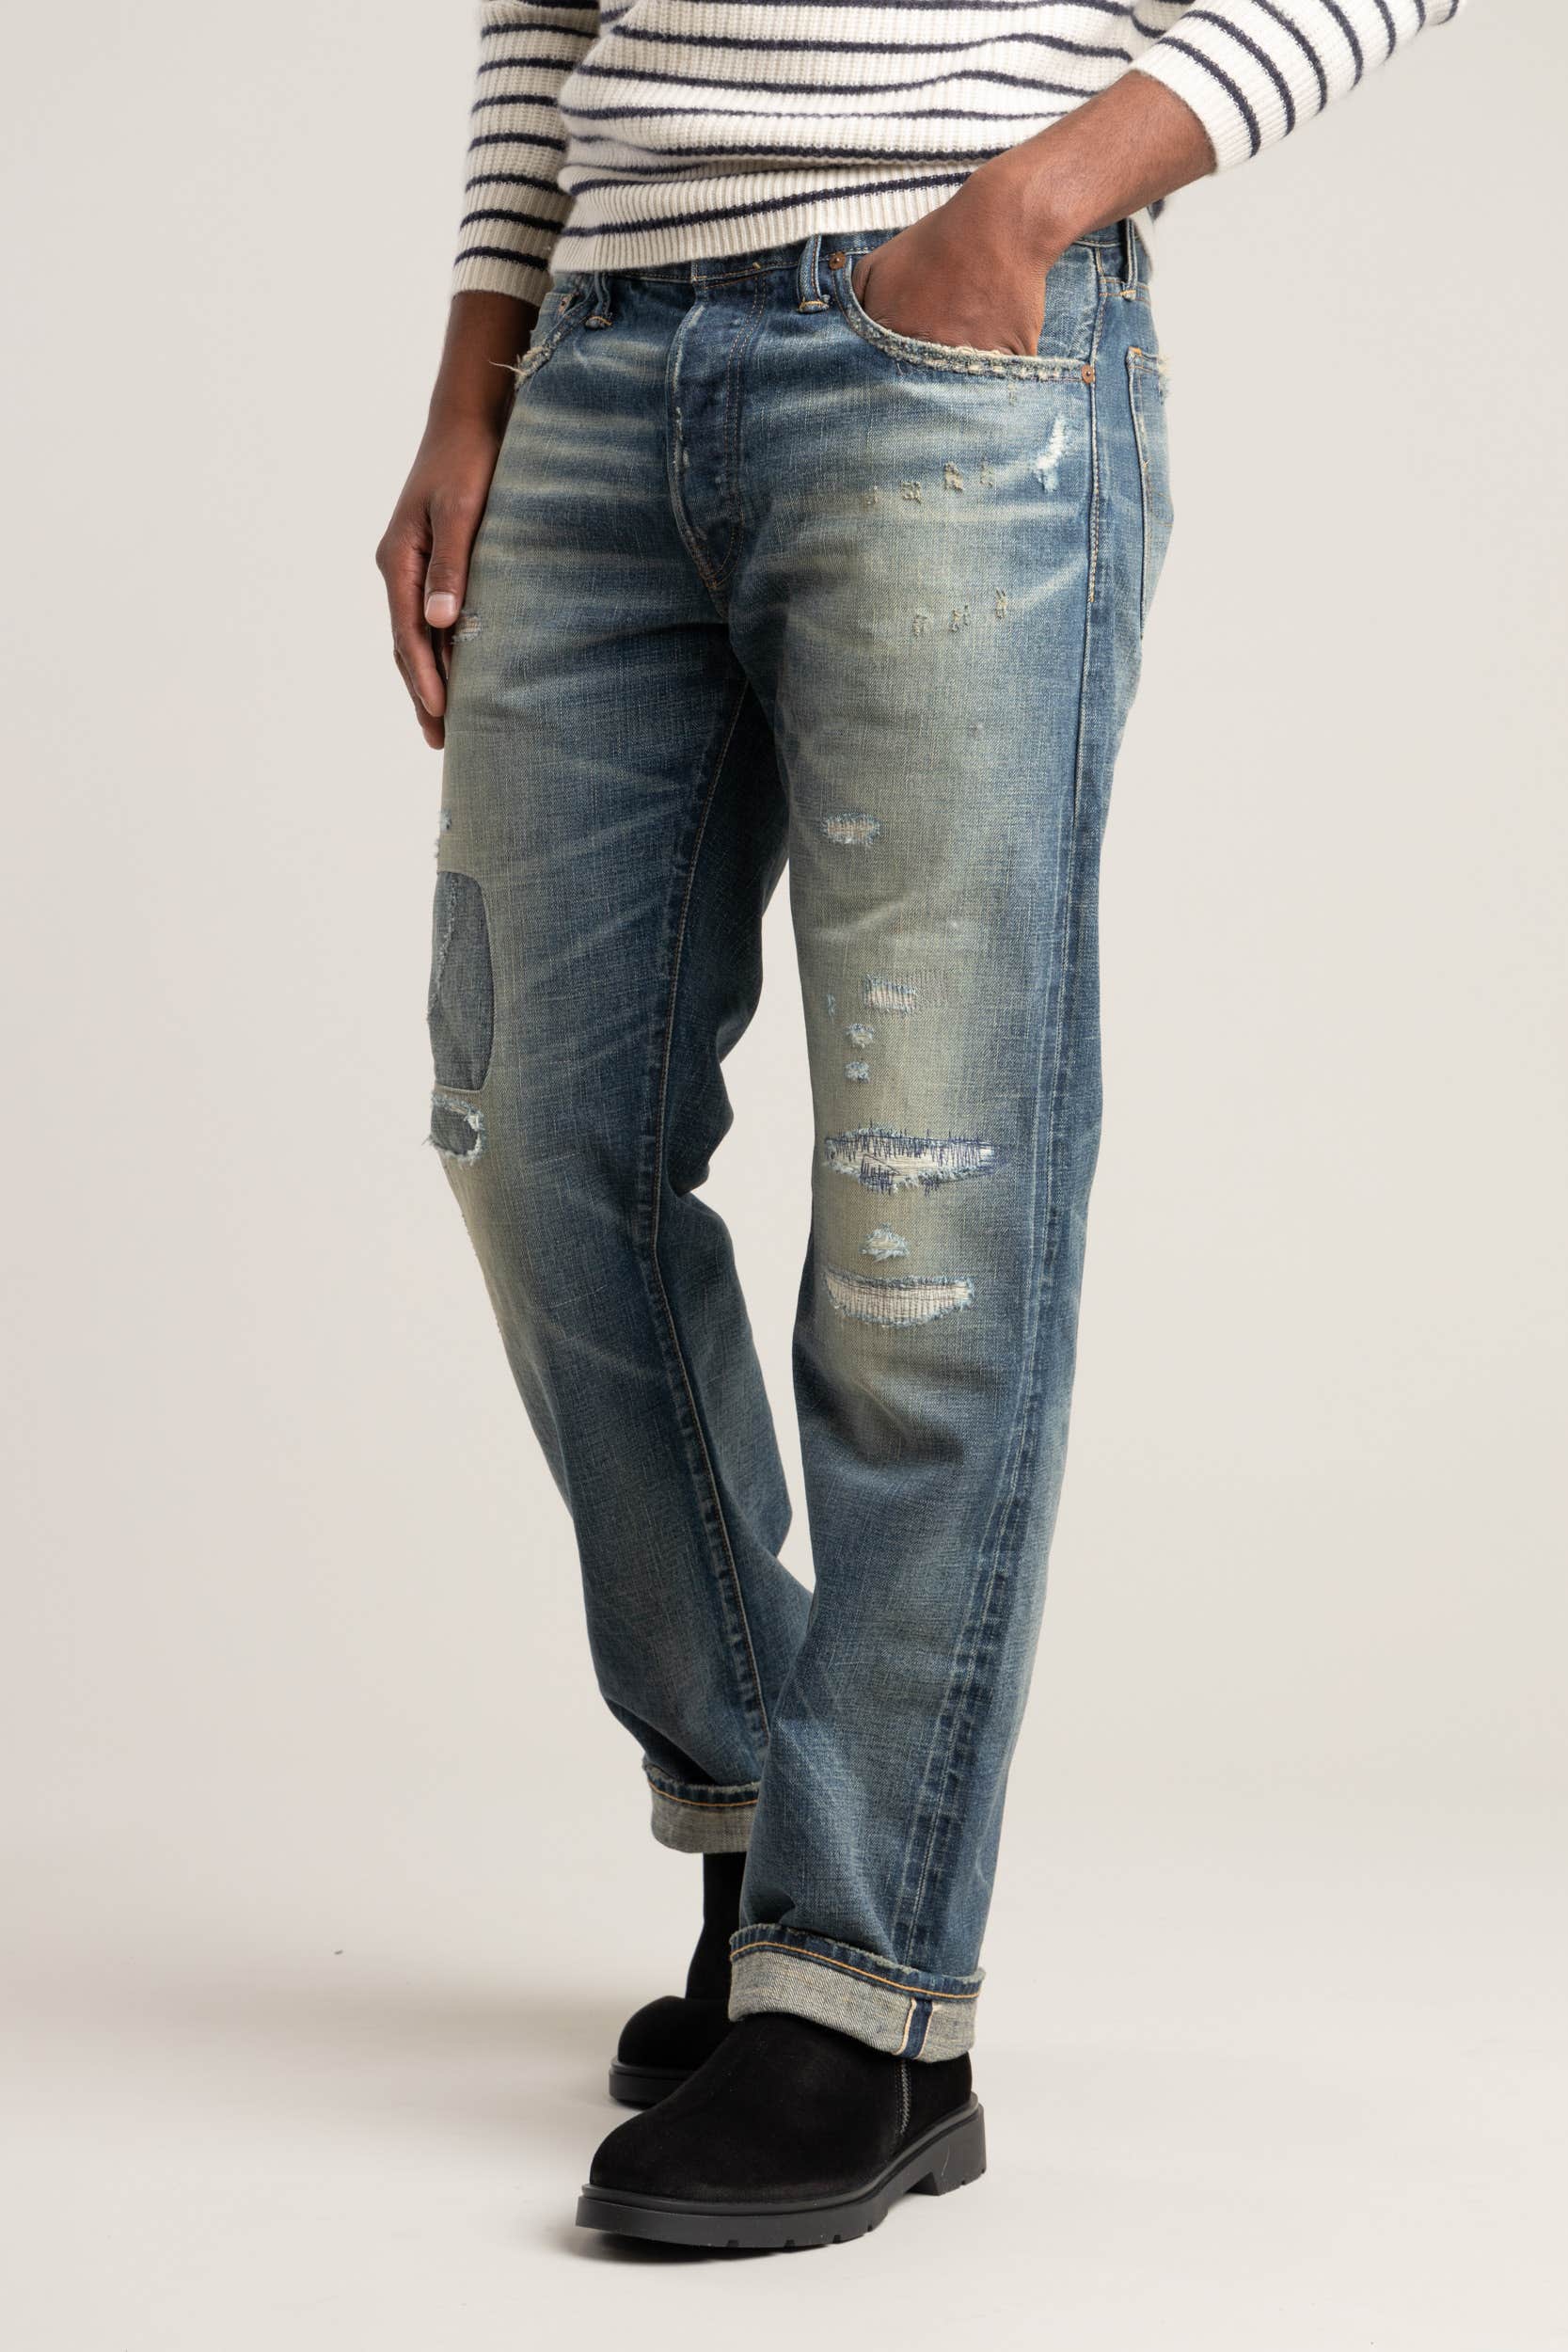 Classic Fit Distressed Selvedge Jean – The Helm Clothing